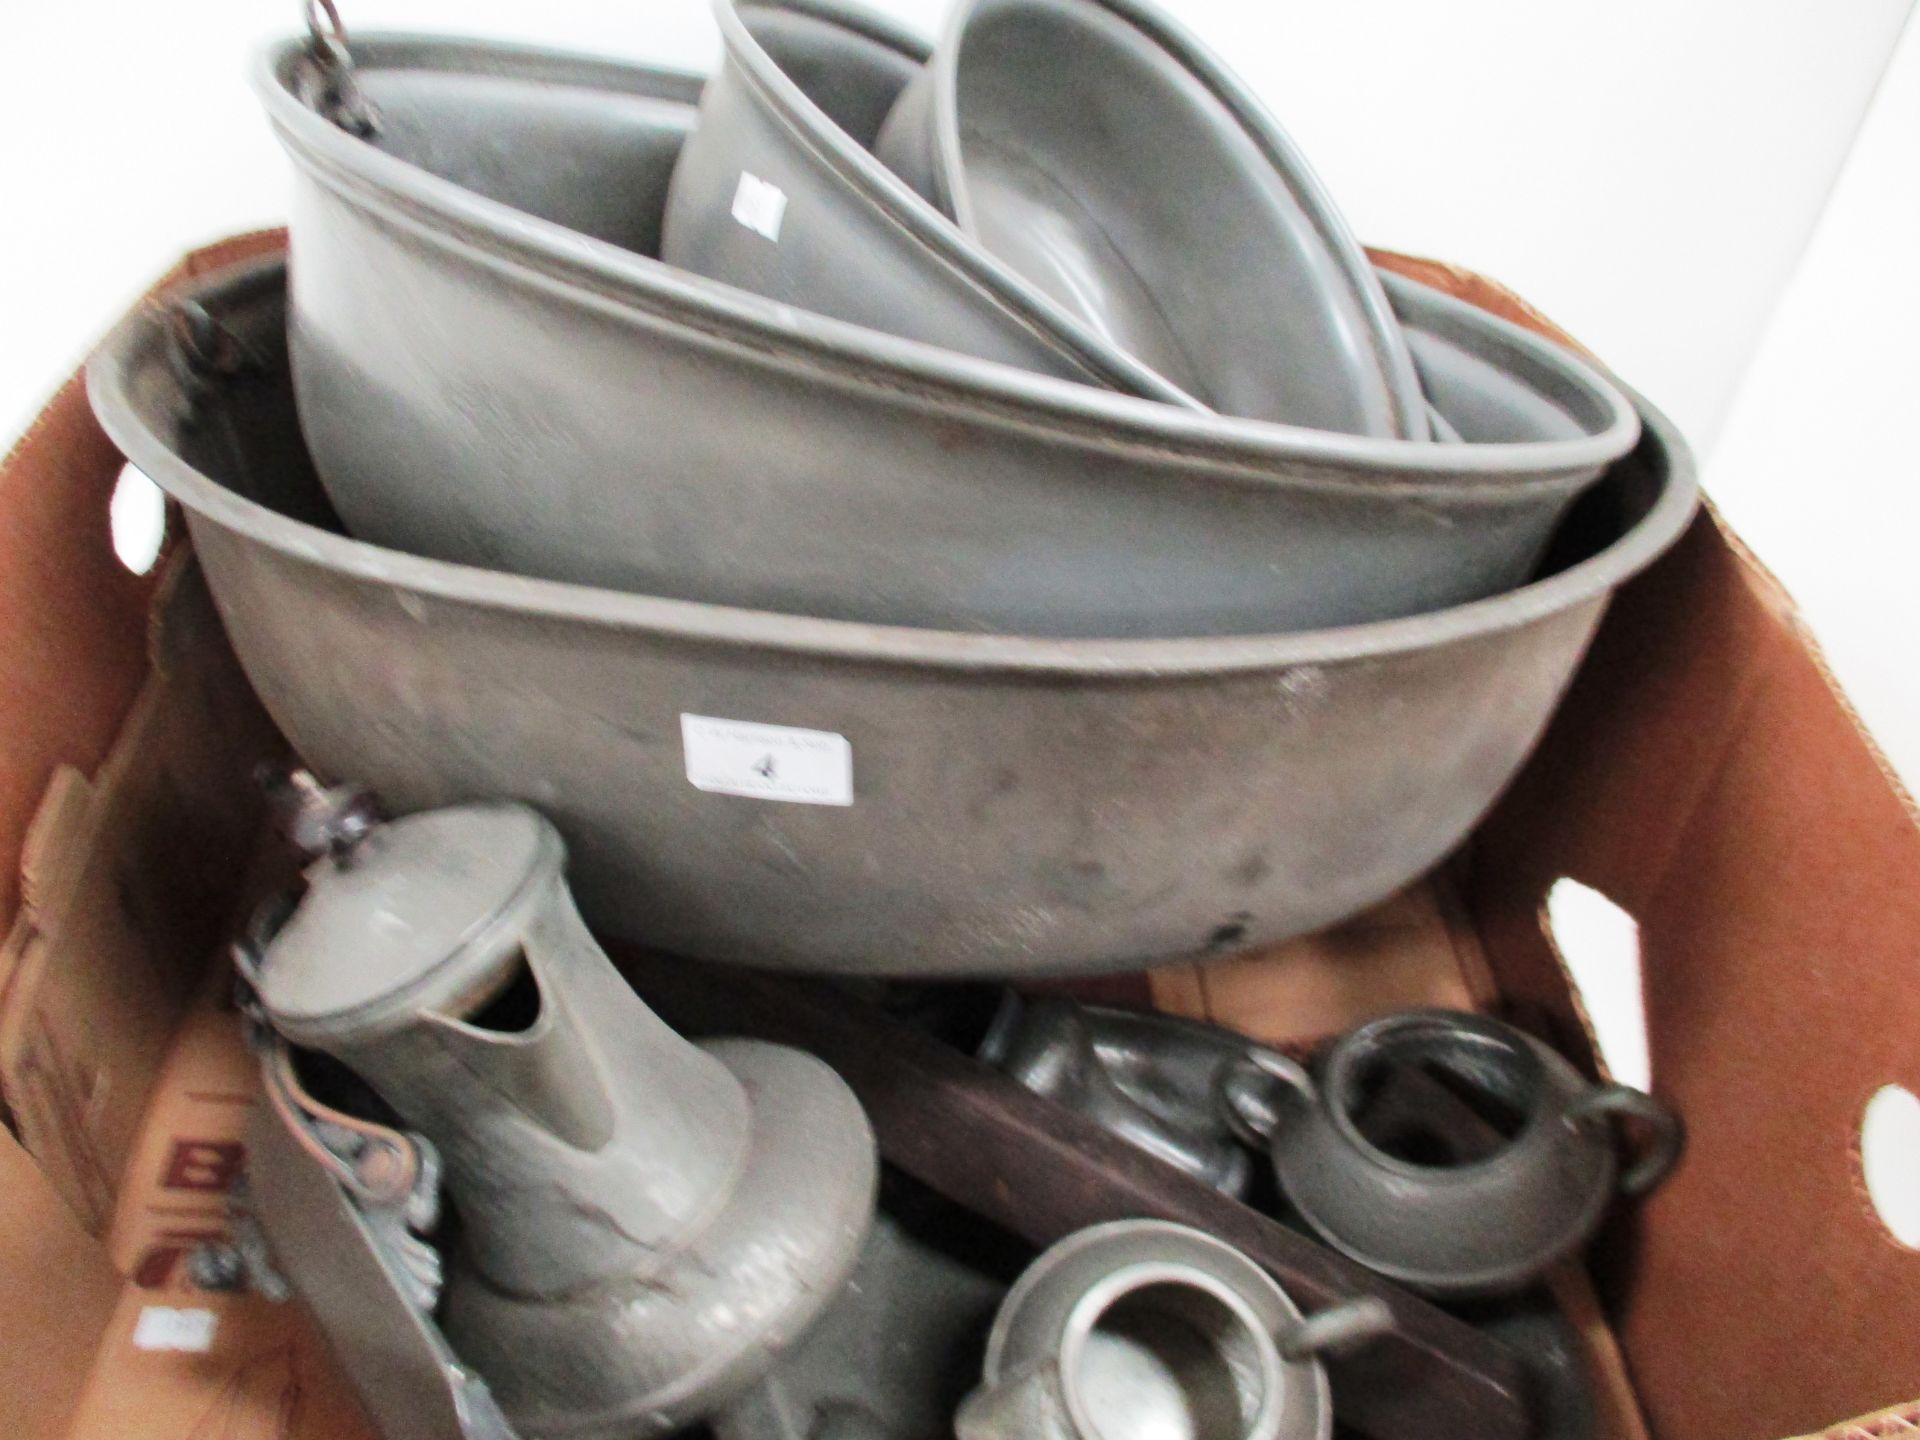 Contents to box - assorted pewter and other metal ware